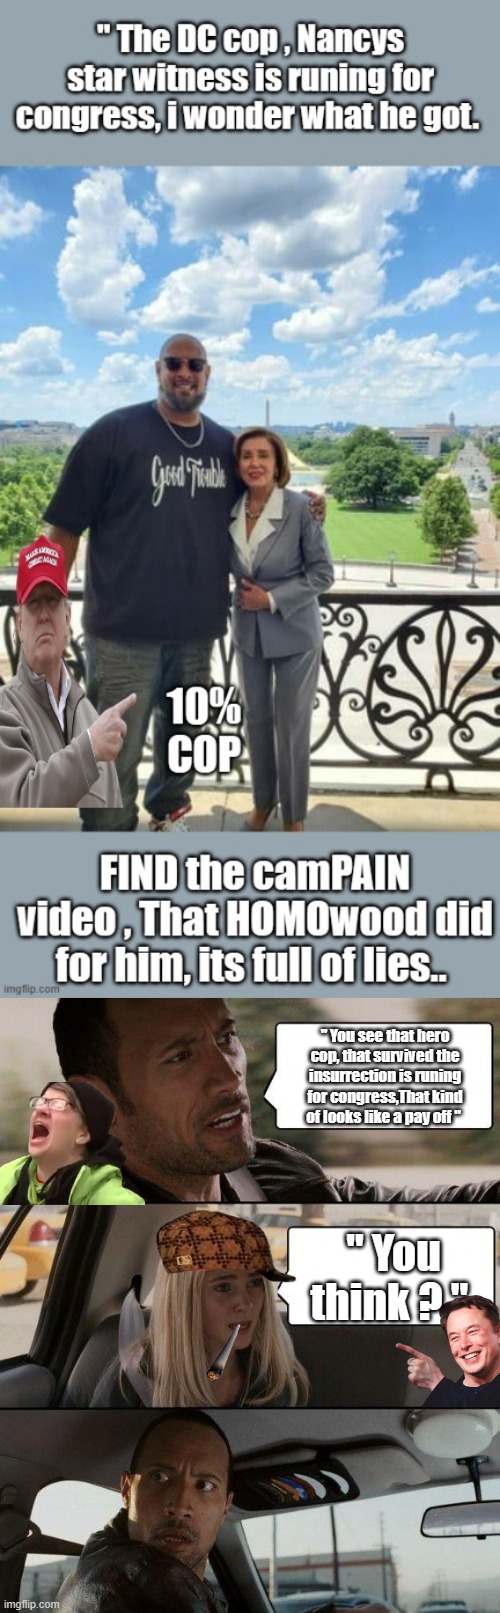 AND now you know the rest of the story | " You see that hero cop, that survived the insurrection is runing for congress,That kind of looks like a pay off "; " You think ? " | image tagged in democrats,republicans,nwo,destroy,america | made w/ Imgflip meme maker